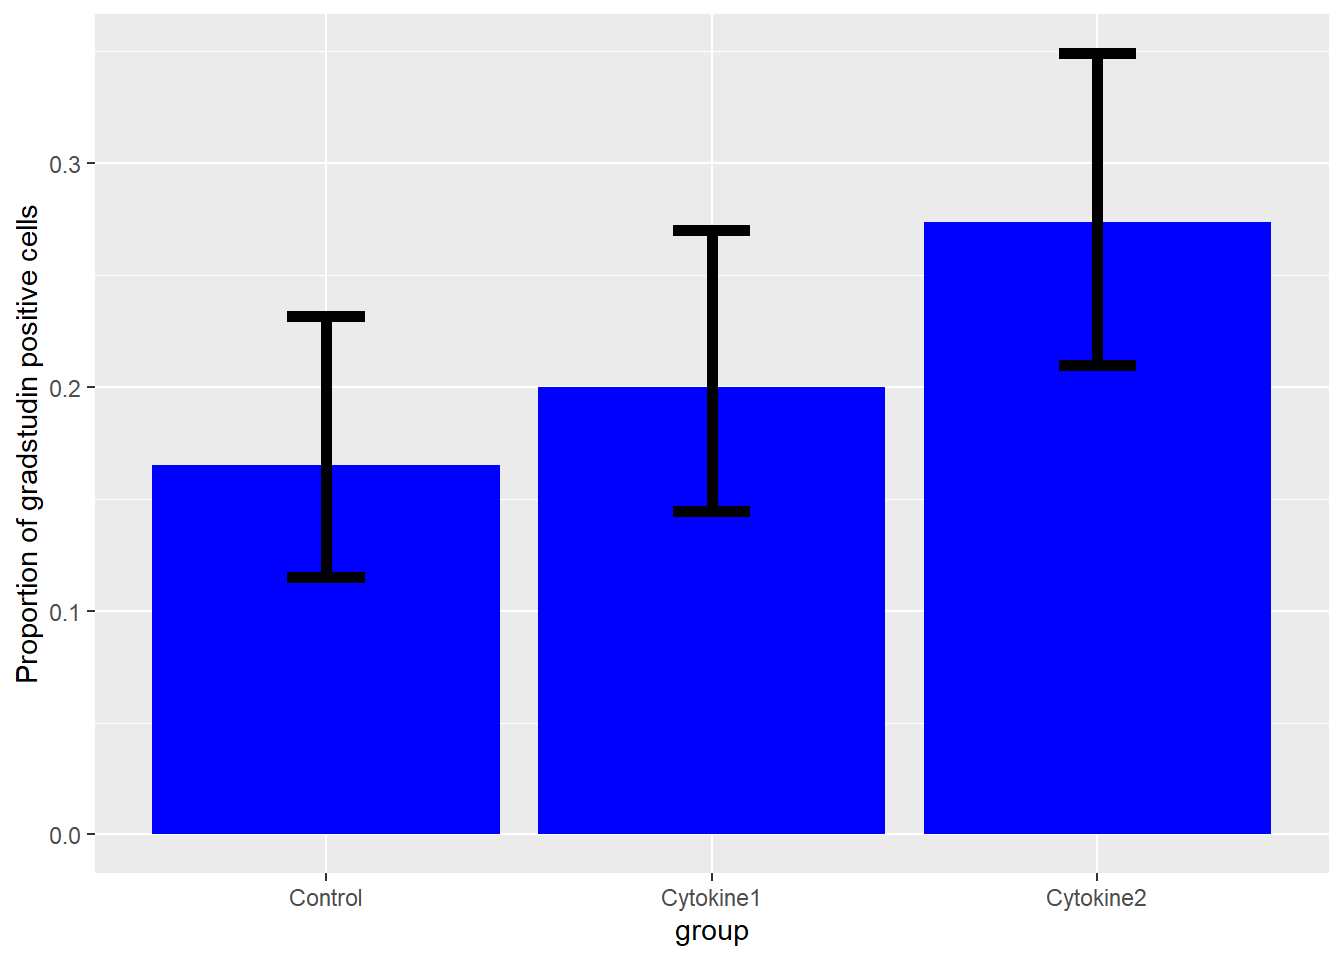 You can infer two proportions differ from plots when their confidence intervals do not overlap. 